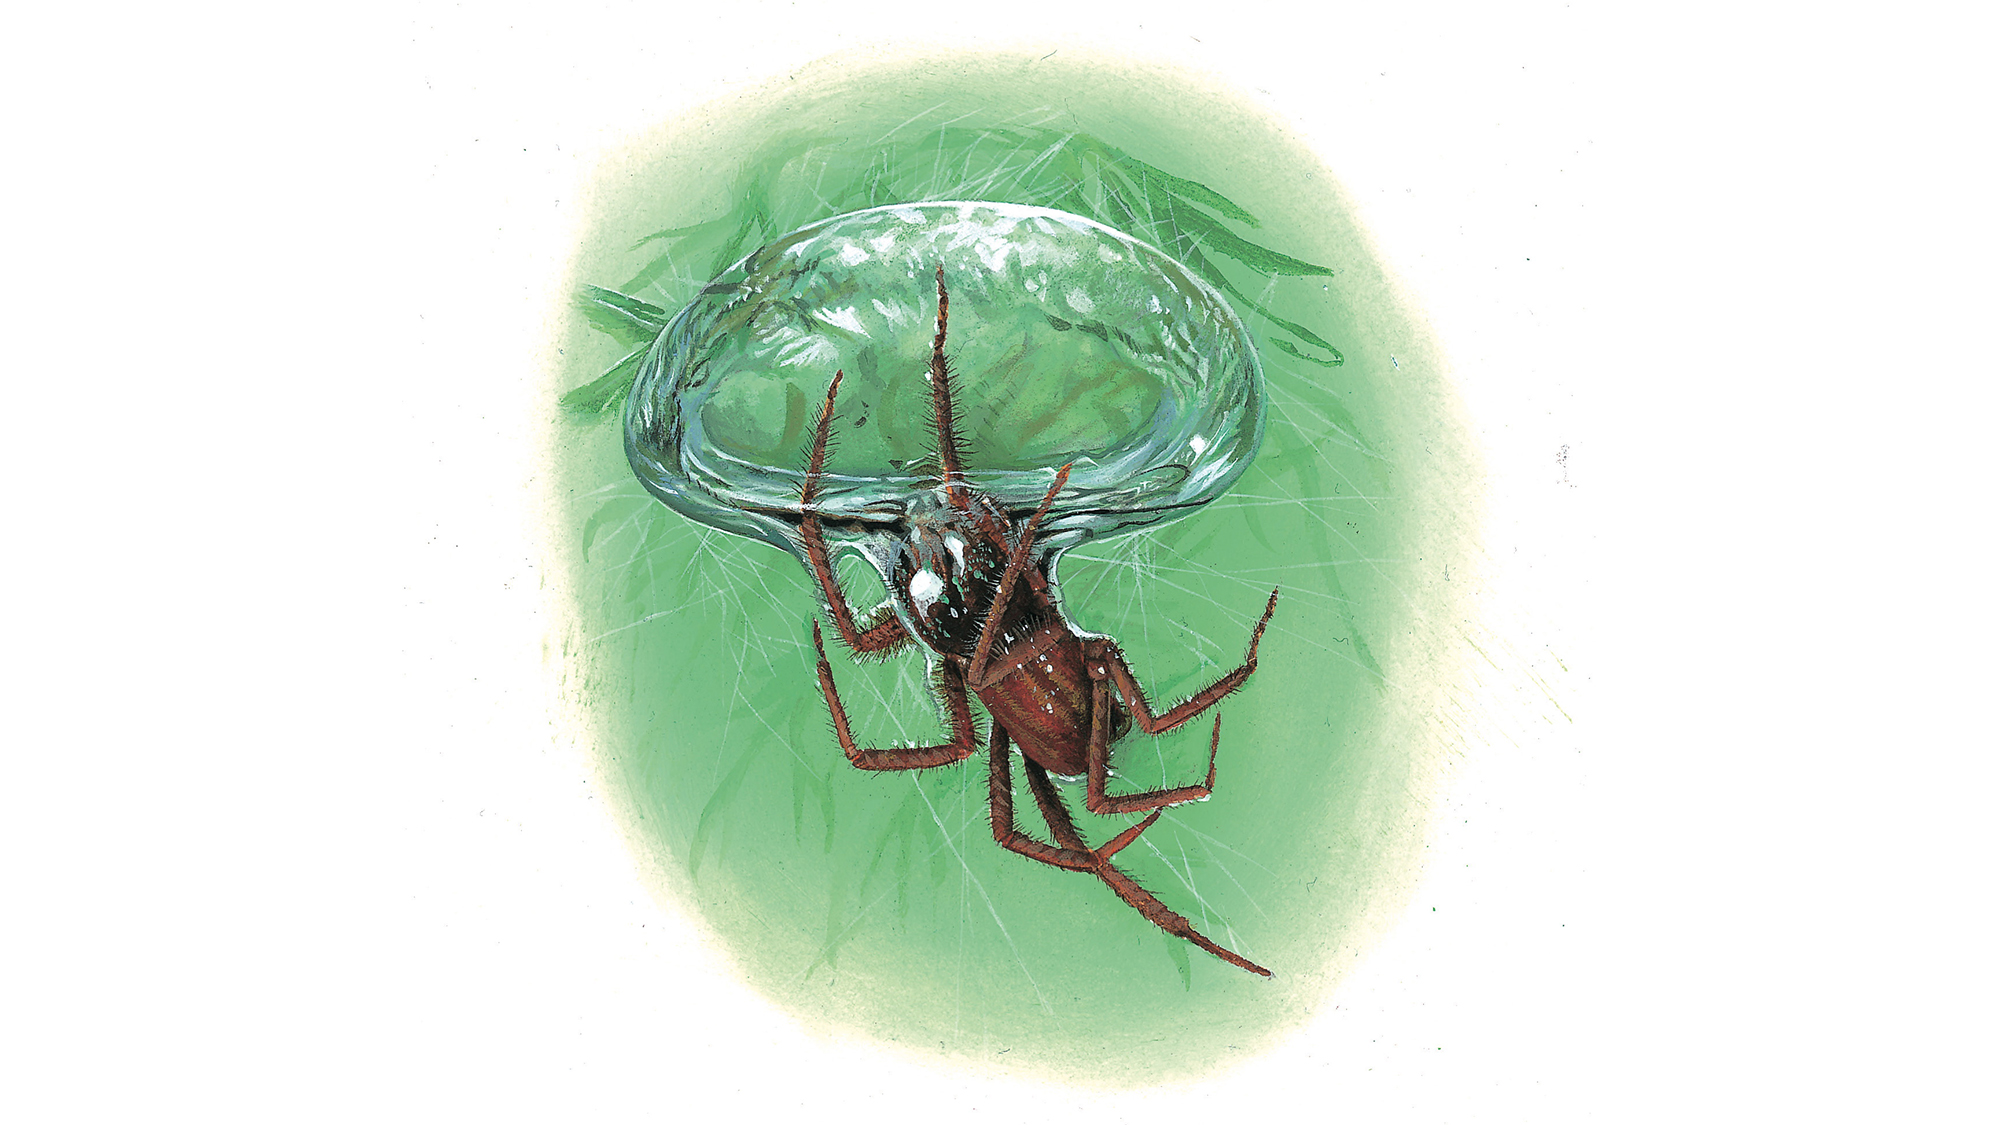 They swim and they spin: Meet the aquatic spiders